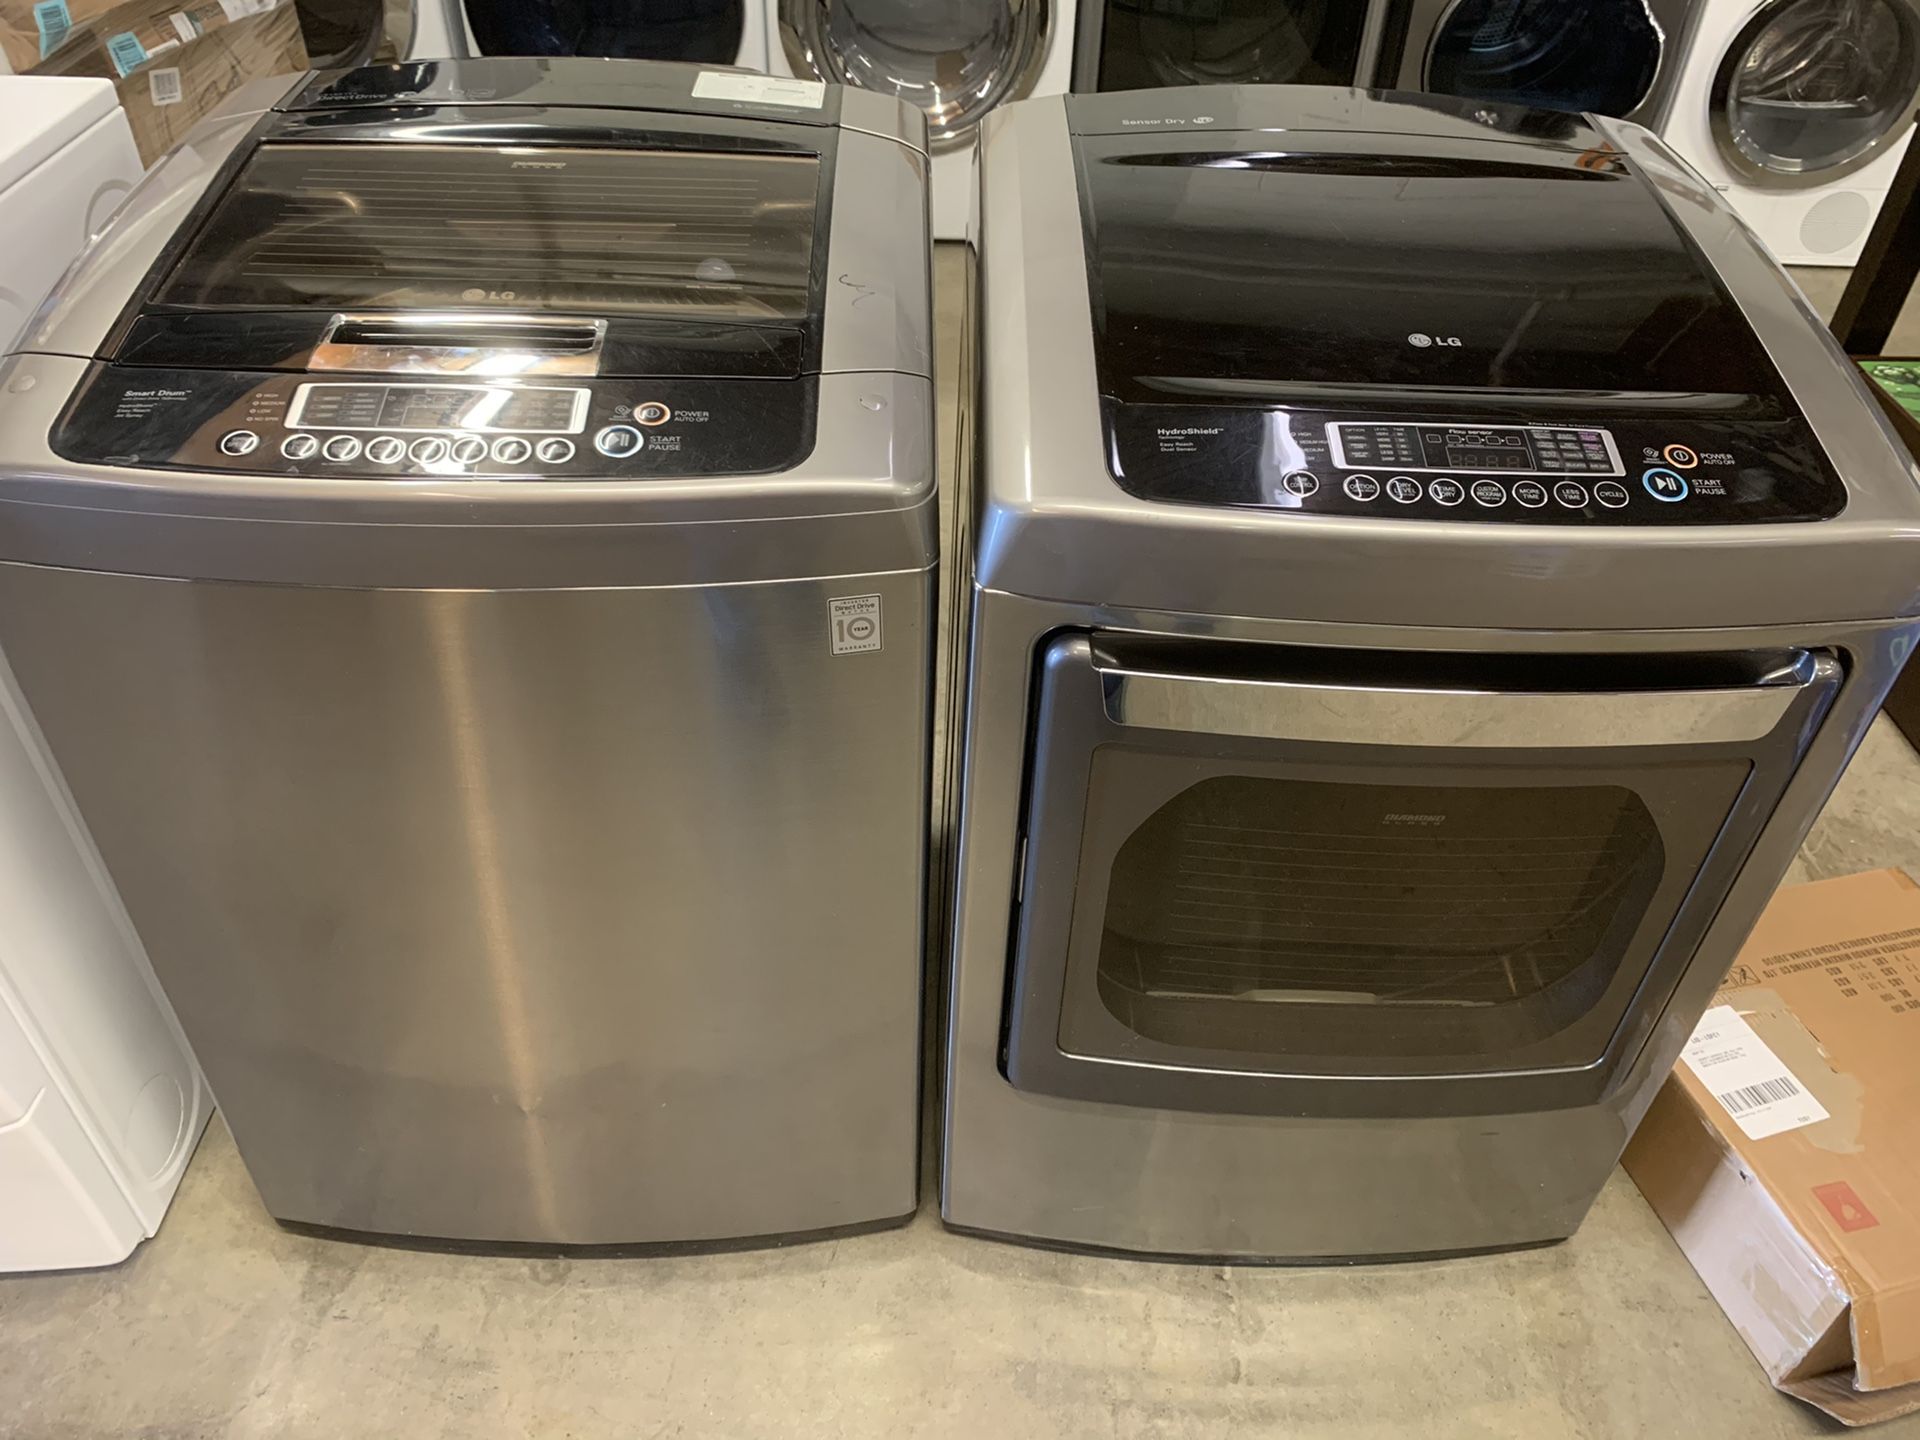 LG top load washer and dryer